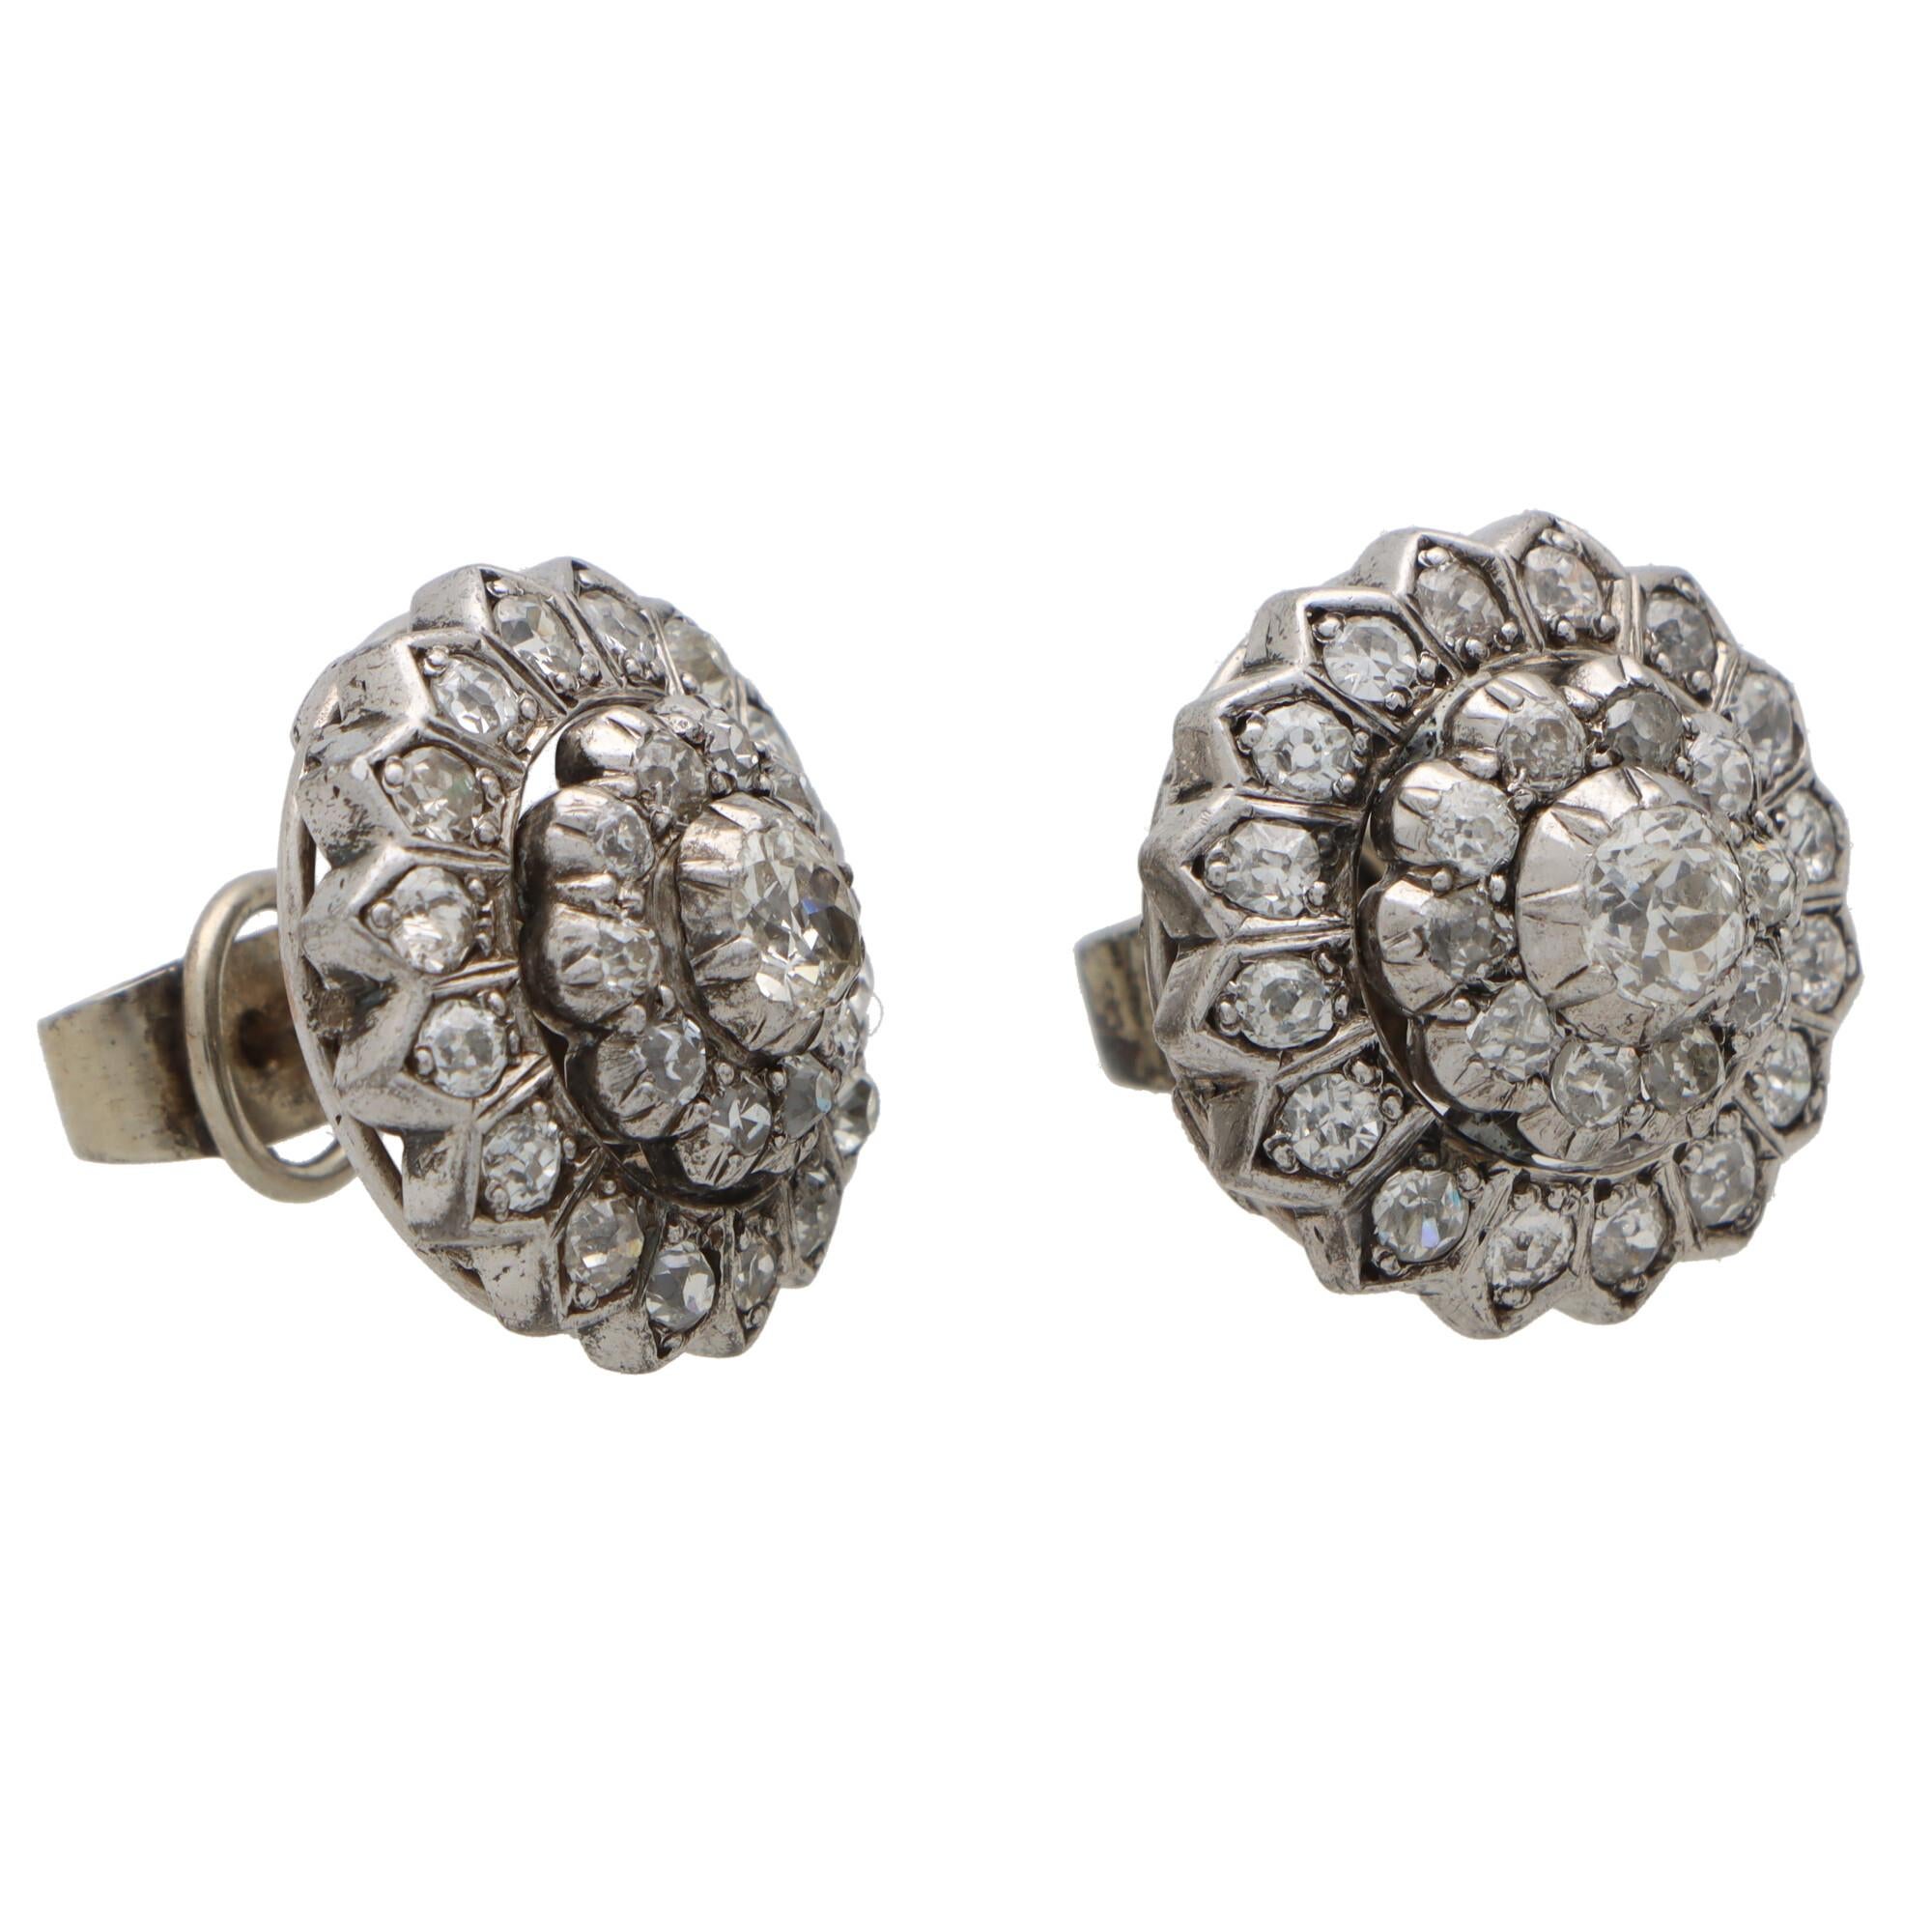 A beautiful pair of Victorian diamond coronet cluster earrings set in silver.

Each earring centrally features a beautiful old mine cut diamond set in a step-down silver setting. The central diamond is then surrounded by two halos of similarly set